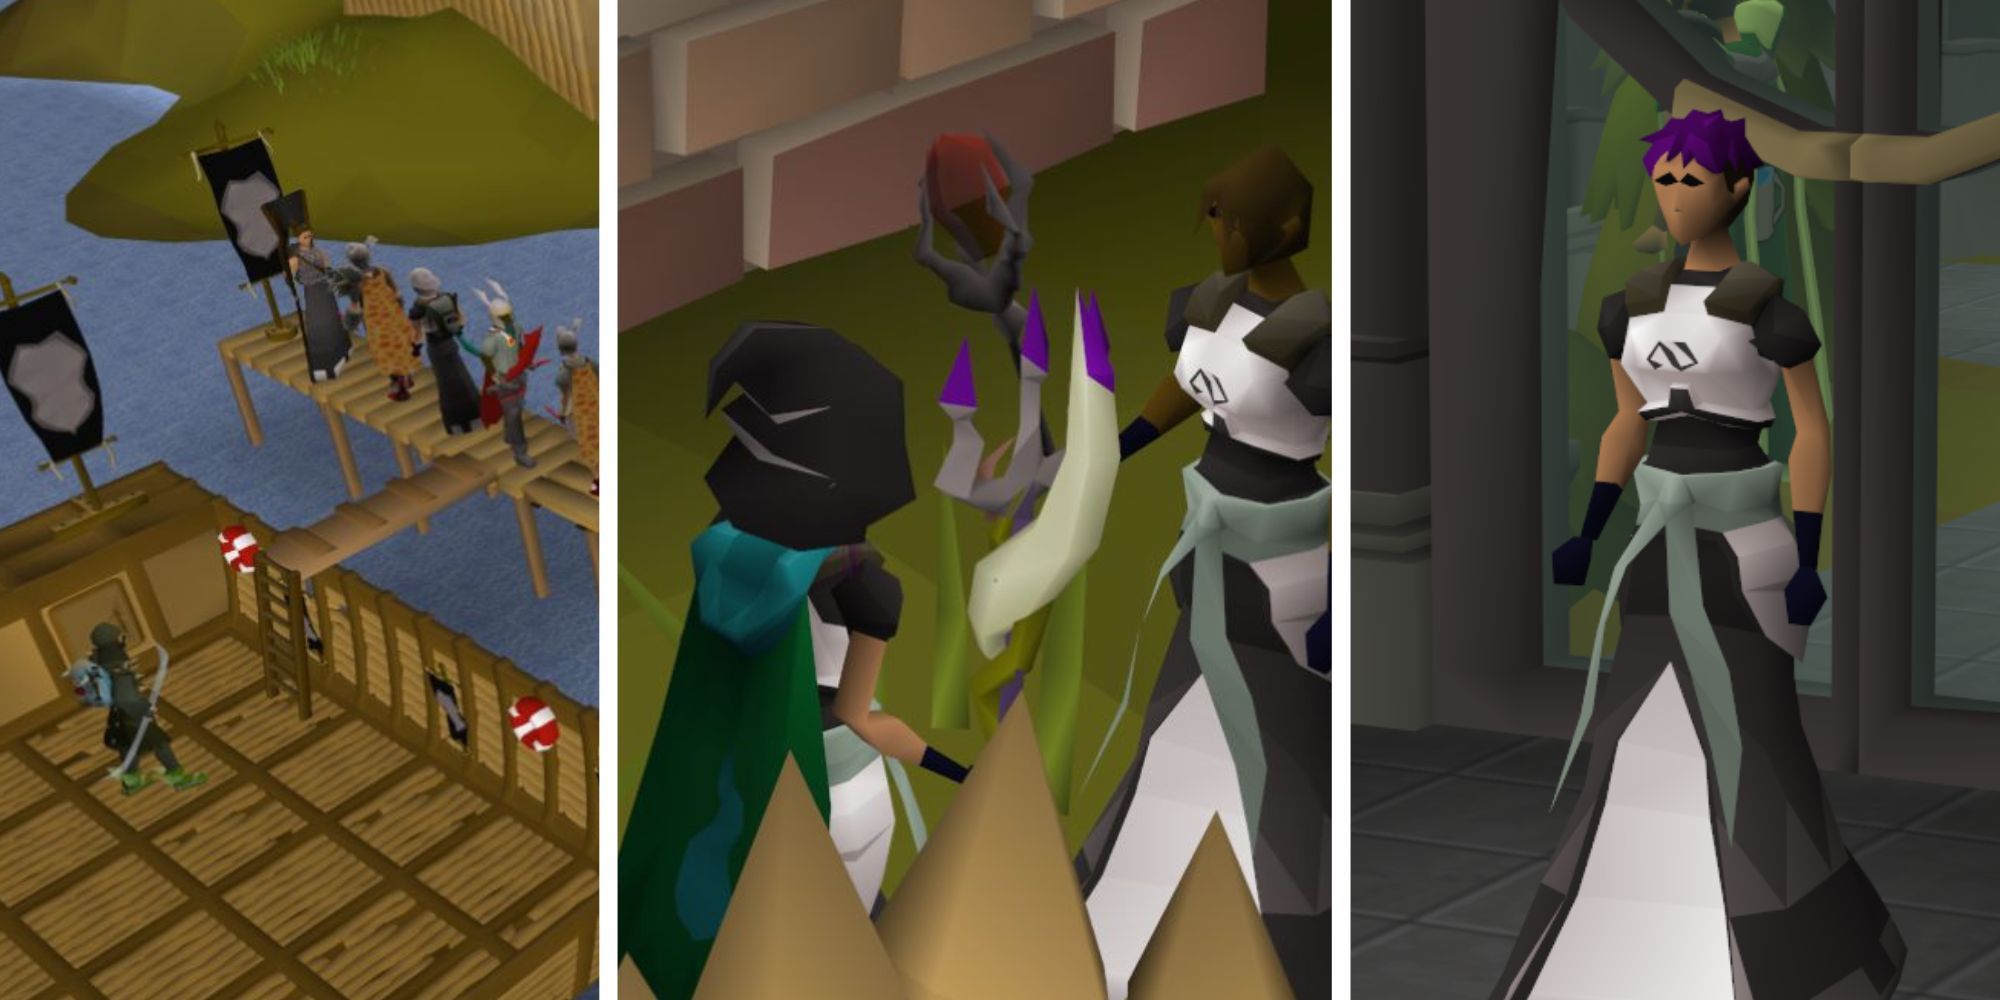 Osrs players standing by to start Pest Control, a player talking to an Elite Void Knight, and a player wearing Elite Void Knight armour